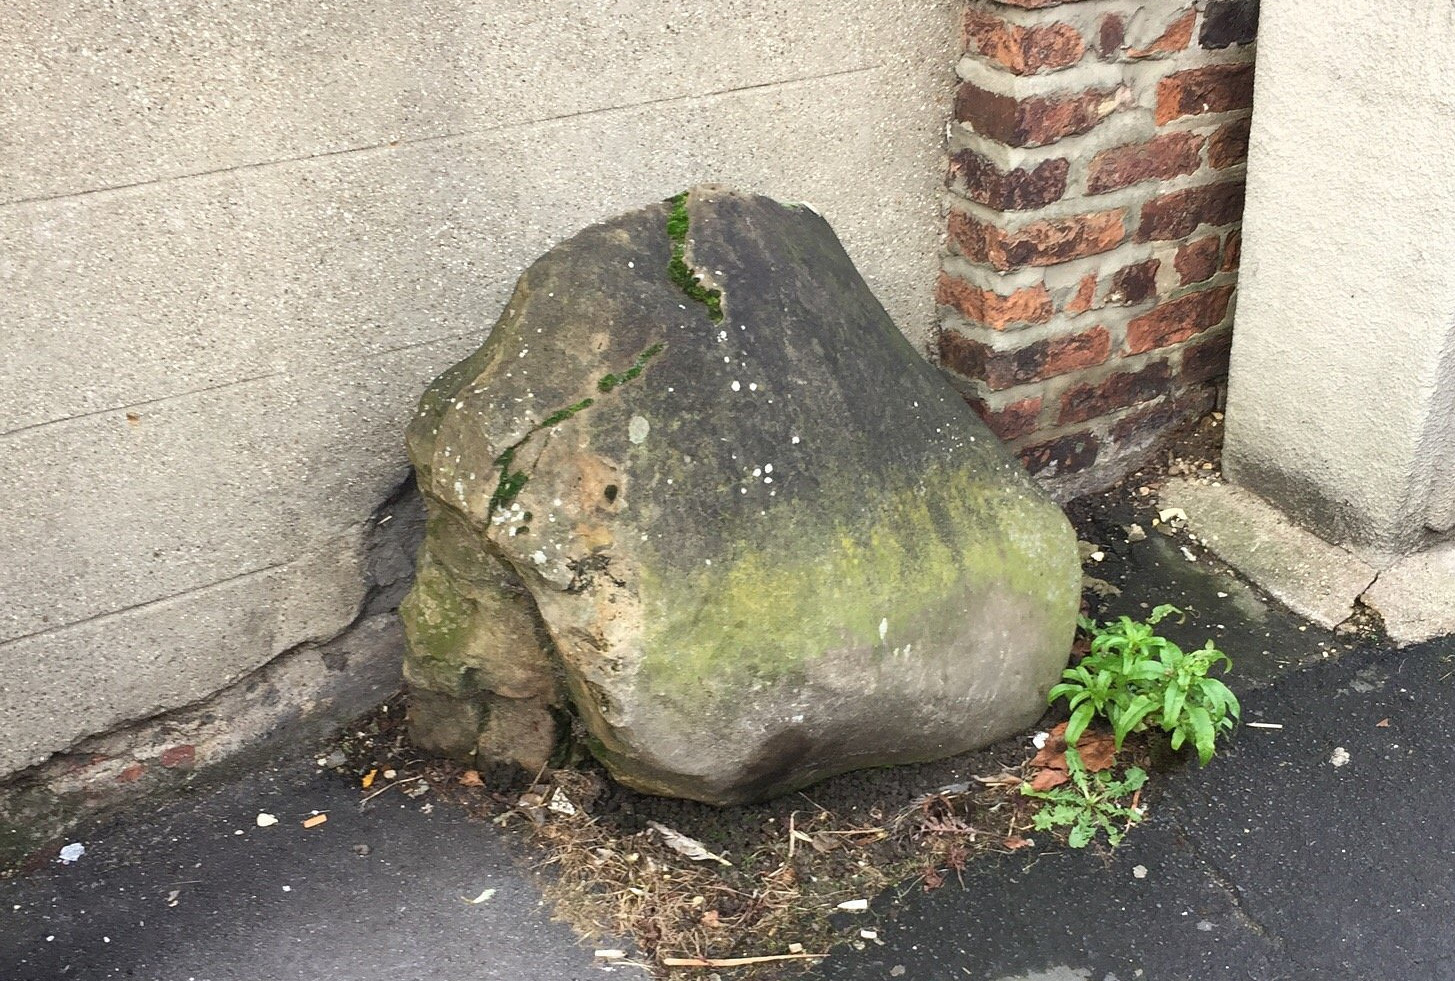 The Giant's Stone lead image